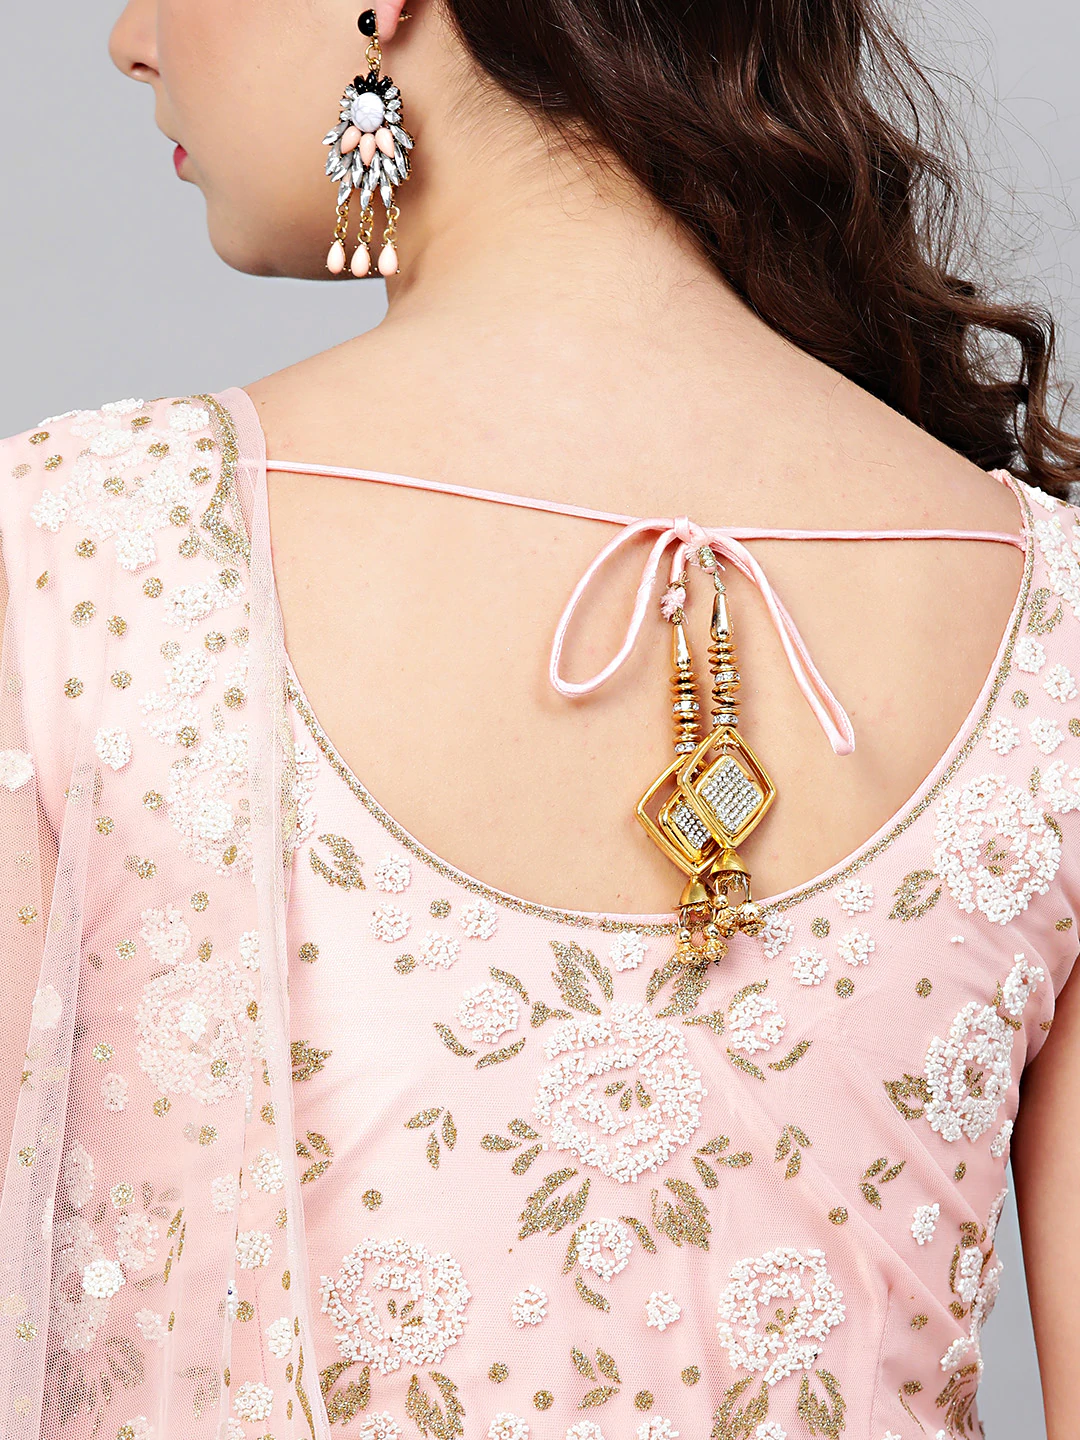 PInk Cocktail Gown with Pearl Glitter embellishements, Ruffled hemline and cutwork dupatta